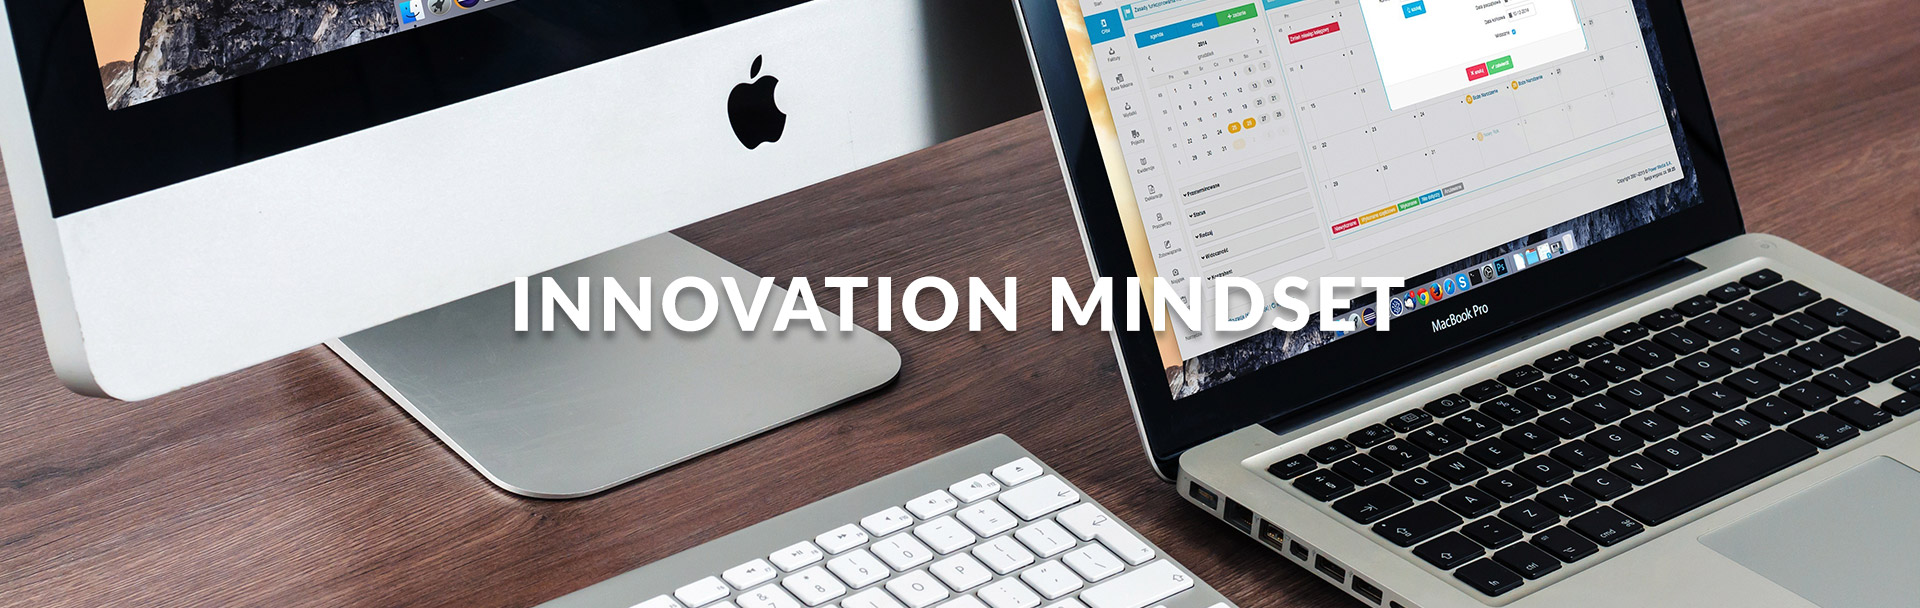 The single mindset that makes Apple the most innovative company in the world